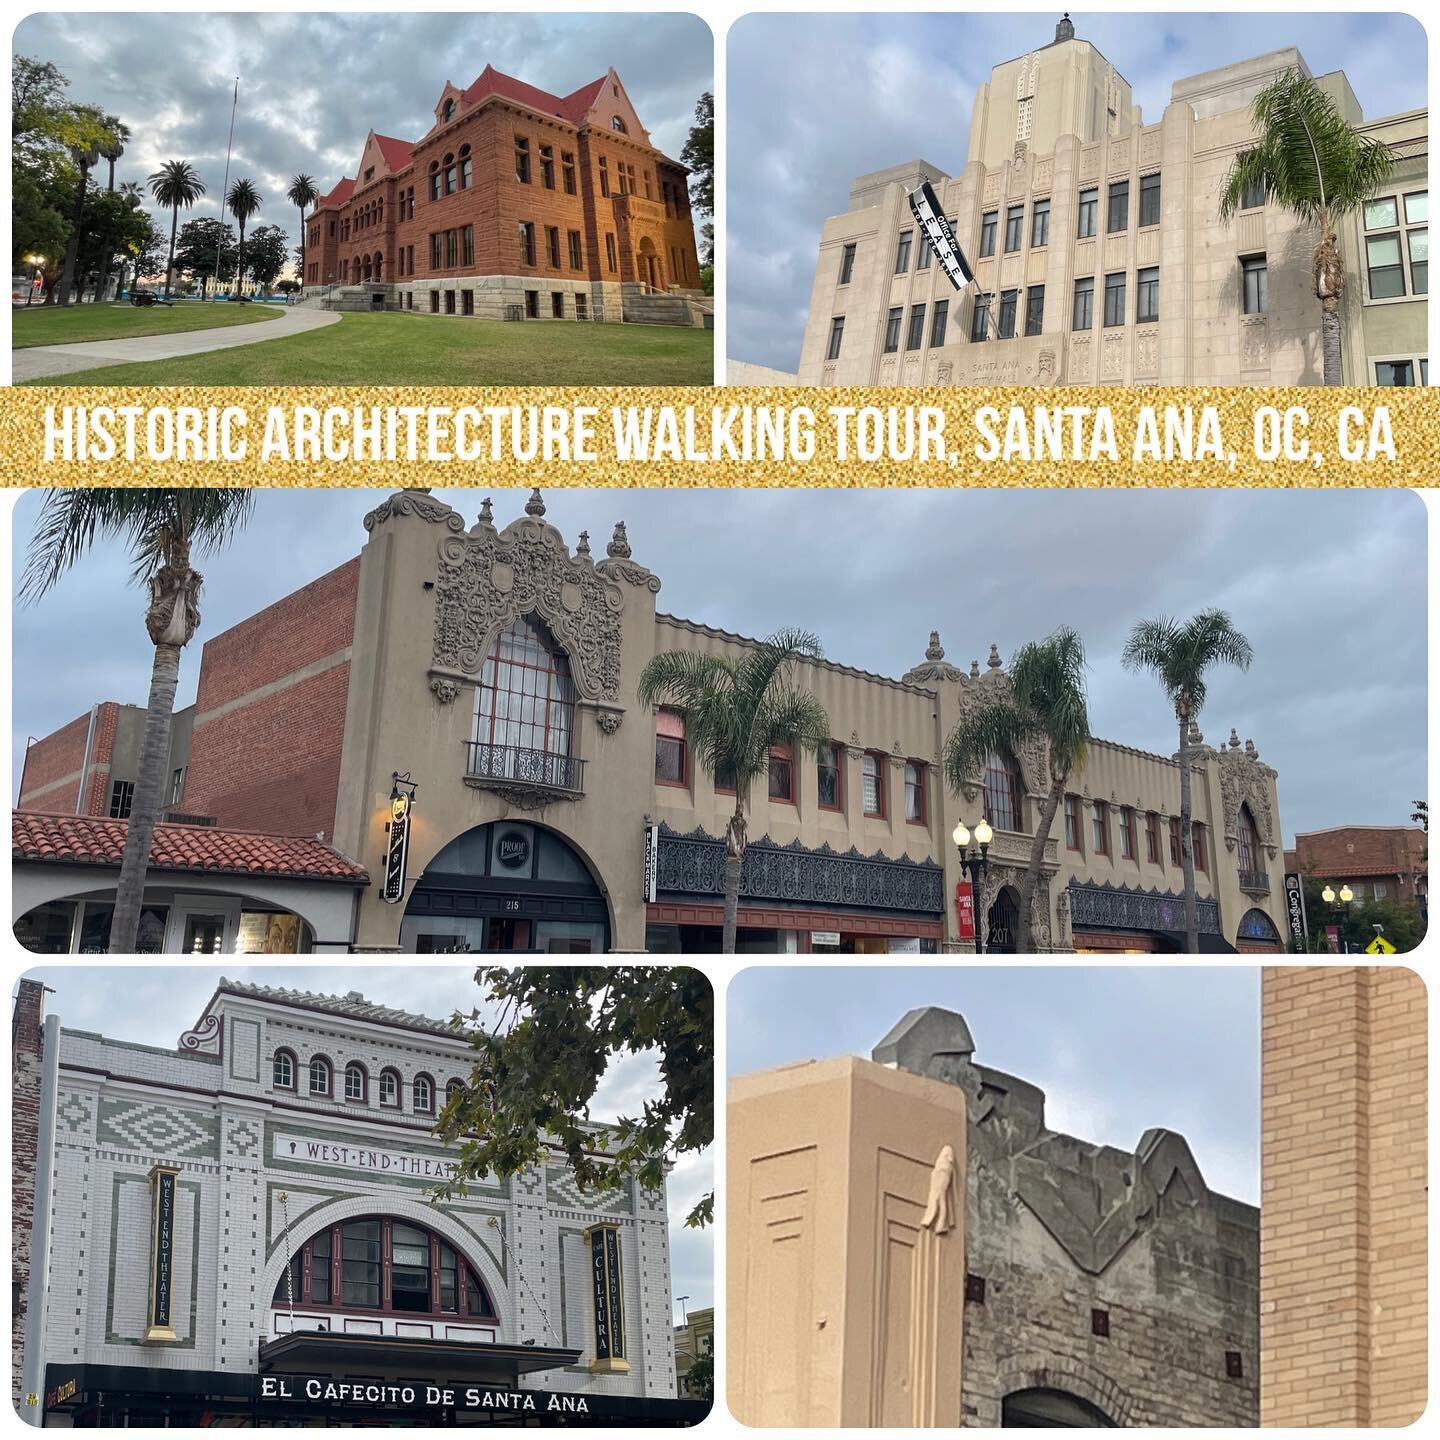 Had a brilliant time learning about the #historic #architecture of #downtownsantaana with #bonvivant &amp; #raconteur #TimRush Saw #richardsonionromanesque courthouse (#california&lsquo;s oldest), #zigzagmoderne old #cityhall, glorious #churrigueresq